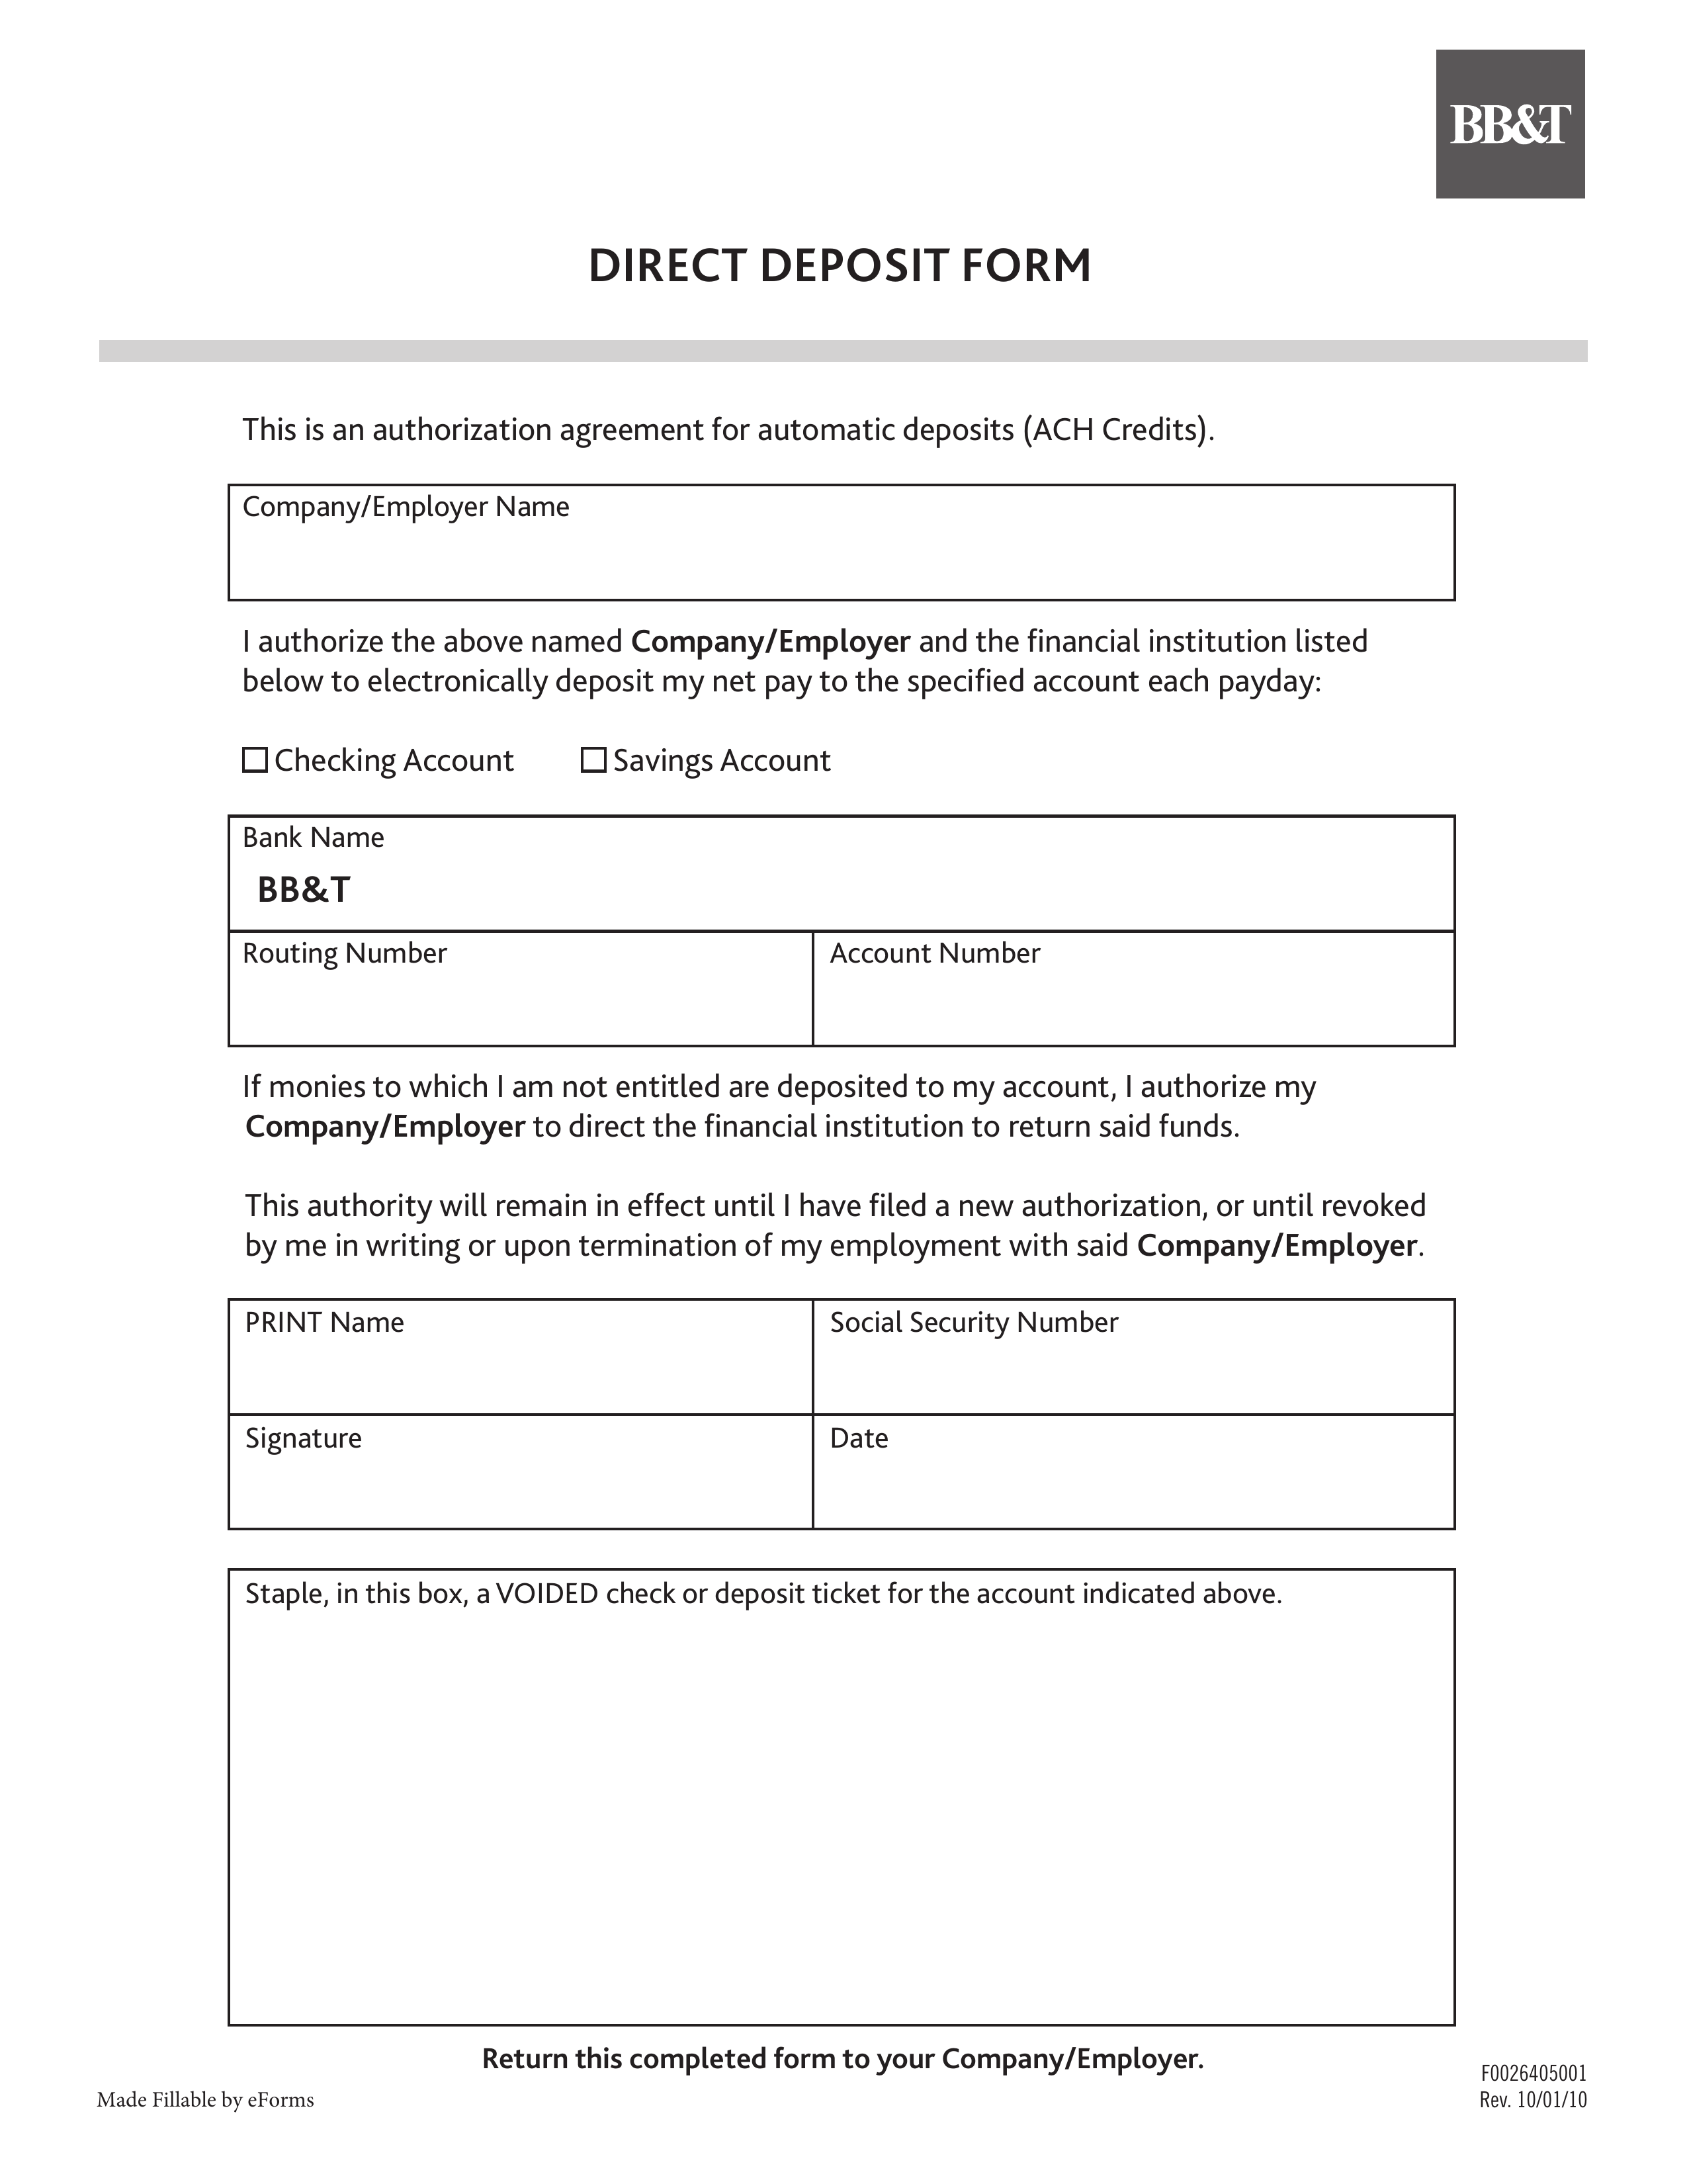 Free BB&T Direct Deposit Authorization Form - PDF – eForms For Direct Deposit Agreement Form Template For Direct Deposit Agreement Form Template